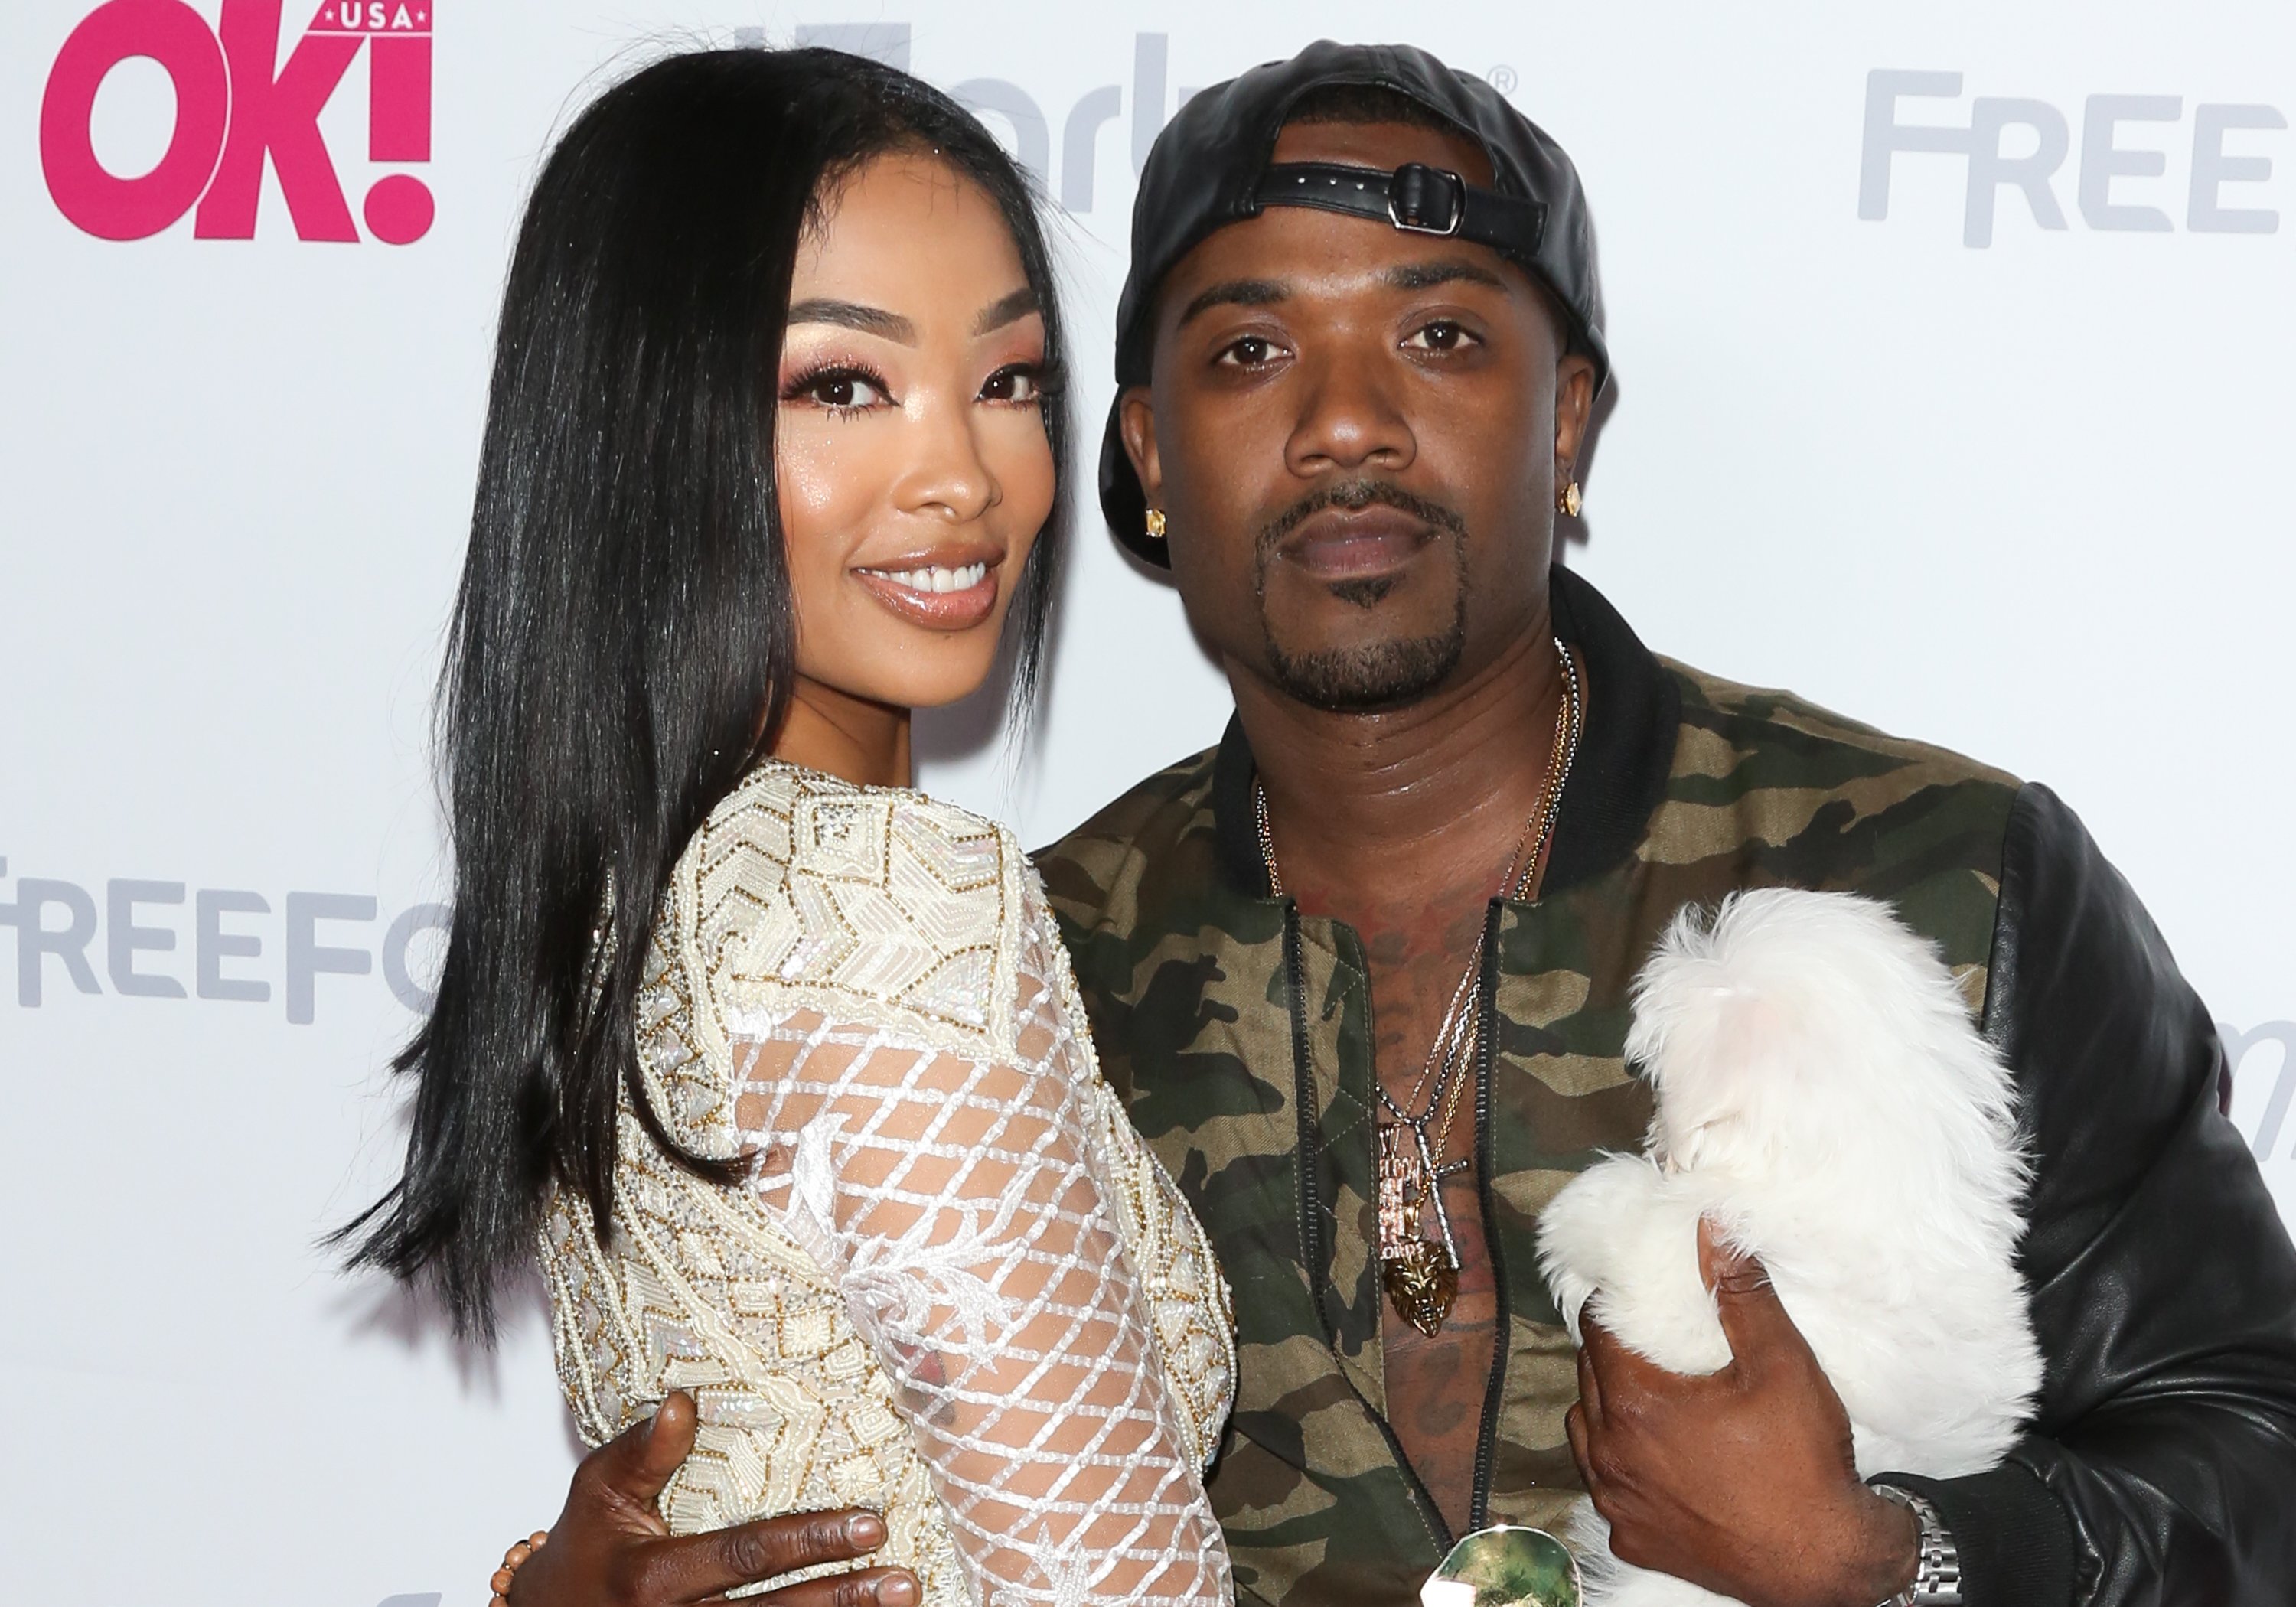 Love Hip Hop Ray J Files For Divorce From Princess Love After A Reconciliation Attempt Doesn T Go As Planned